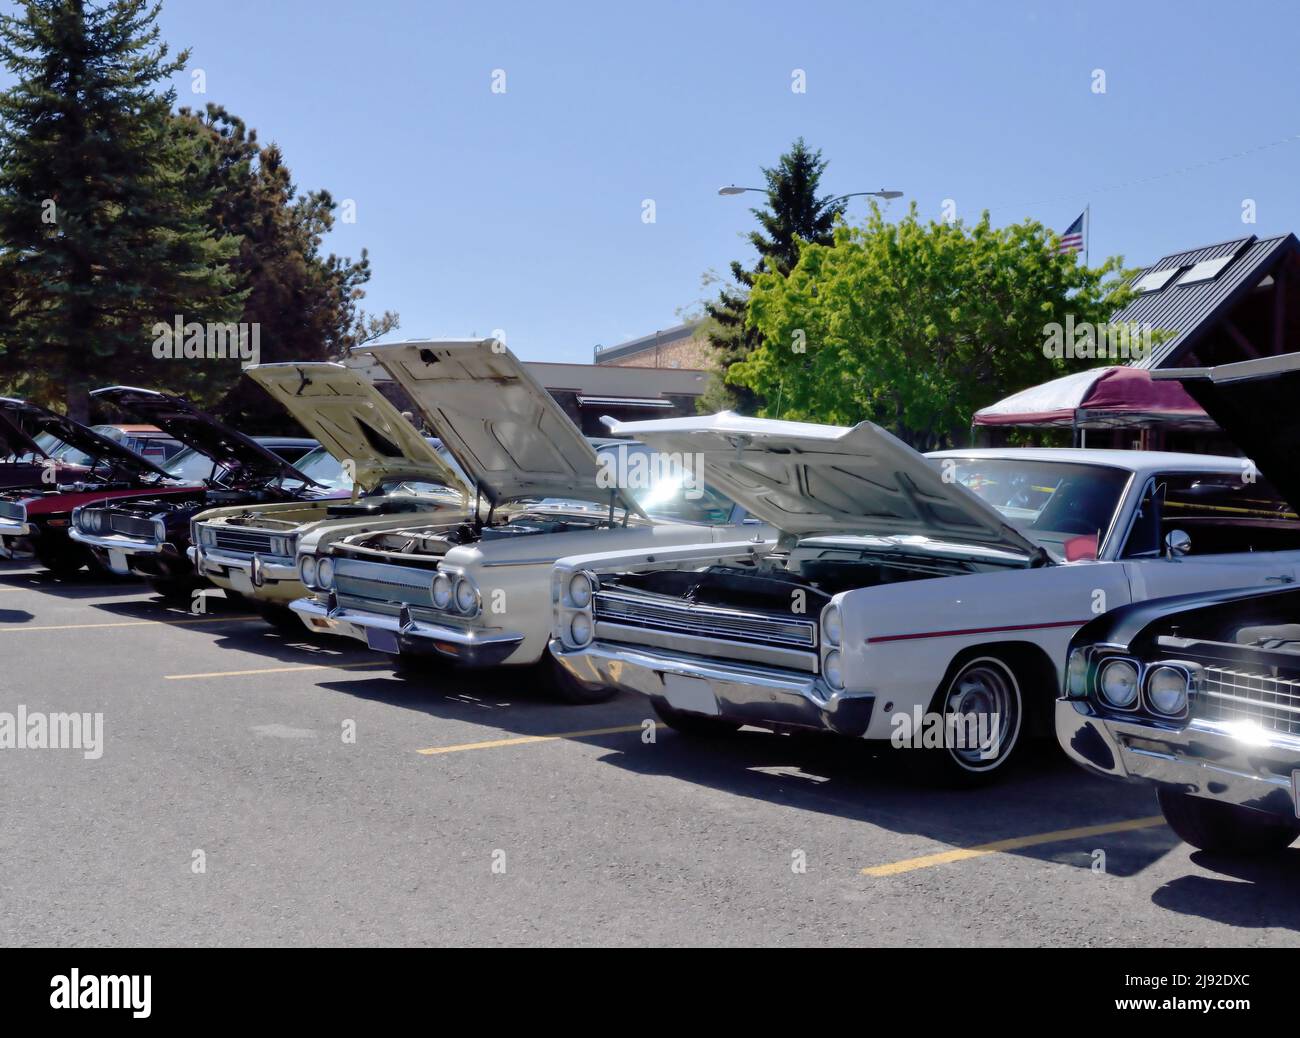 Row of vintage cars with engine hoods up, on display at summer USA car show. Stock Photo